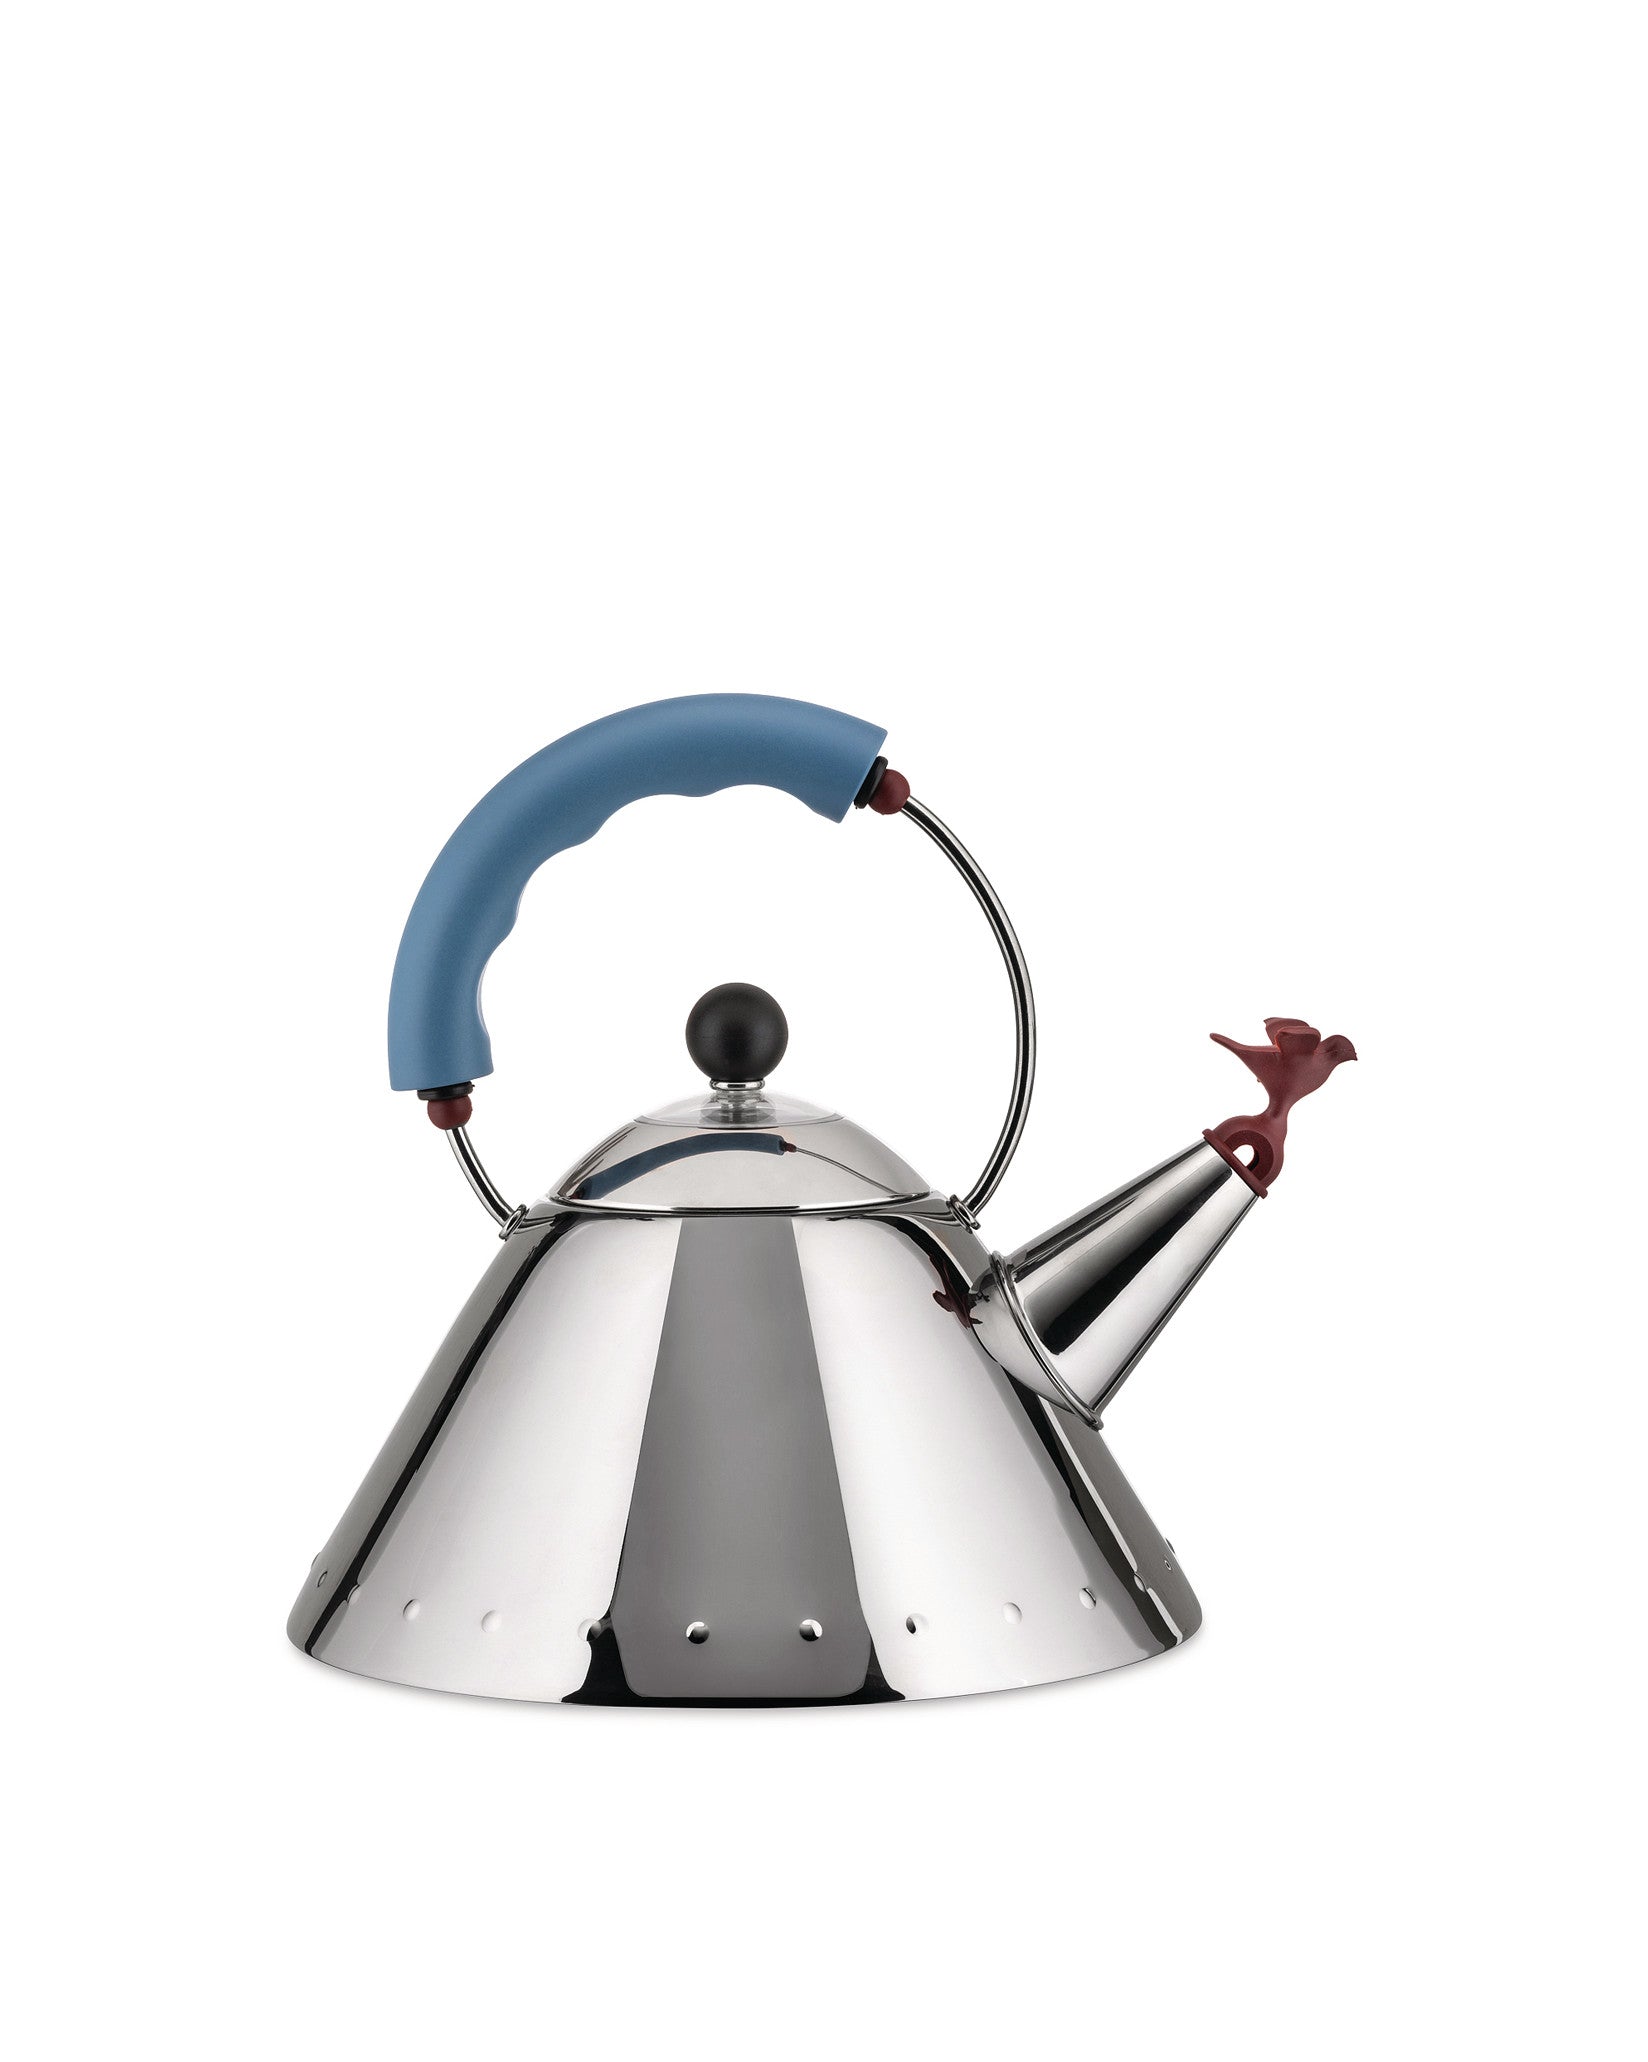 Iconic and hugely recognisable 9093 bird whistle kettle by Michael Graves. Conical-shaped stainless steel induction hob top kettle with multicoloured handles.